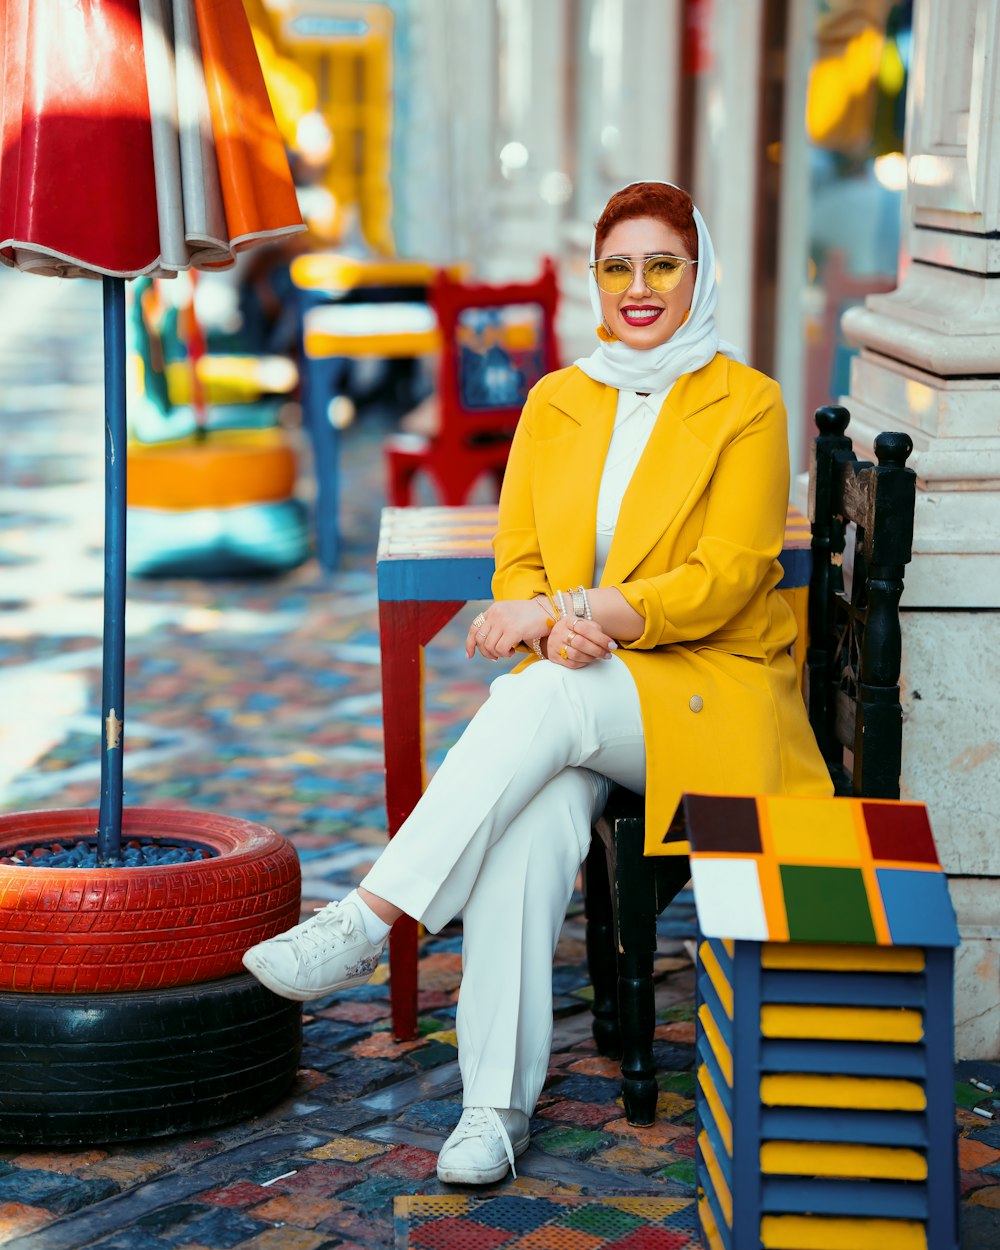 a person sitting on a yellow chair